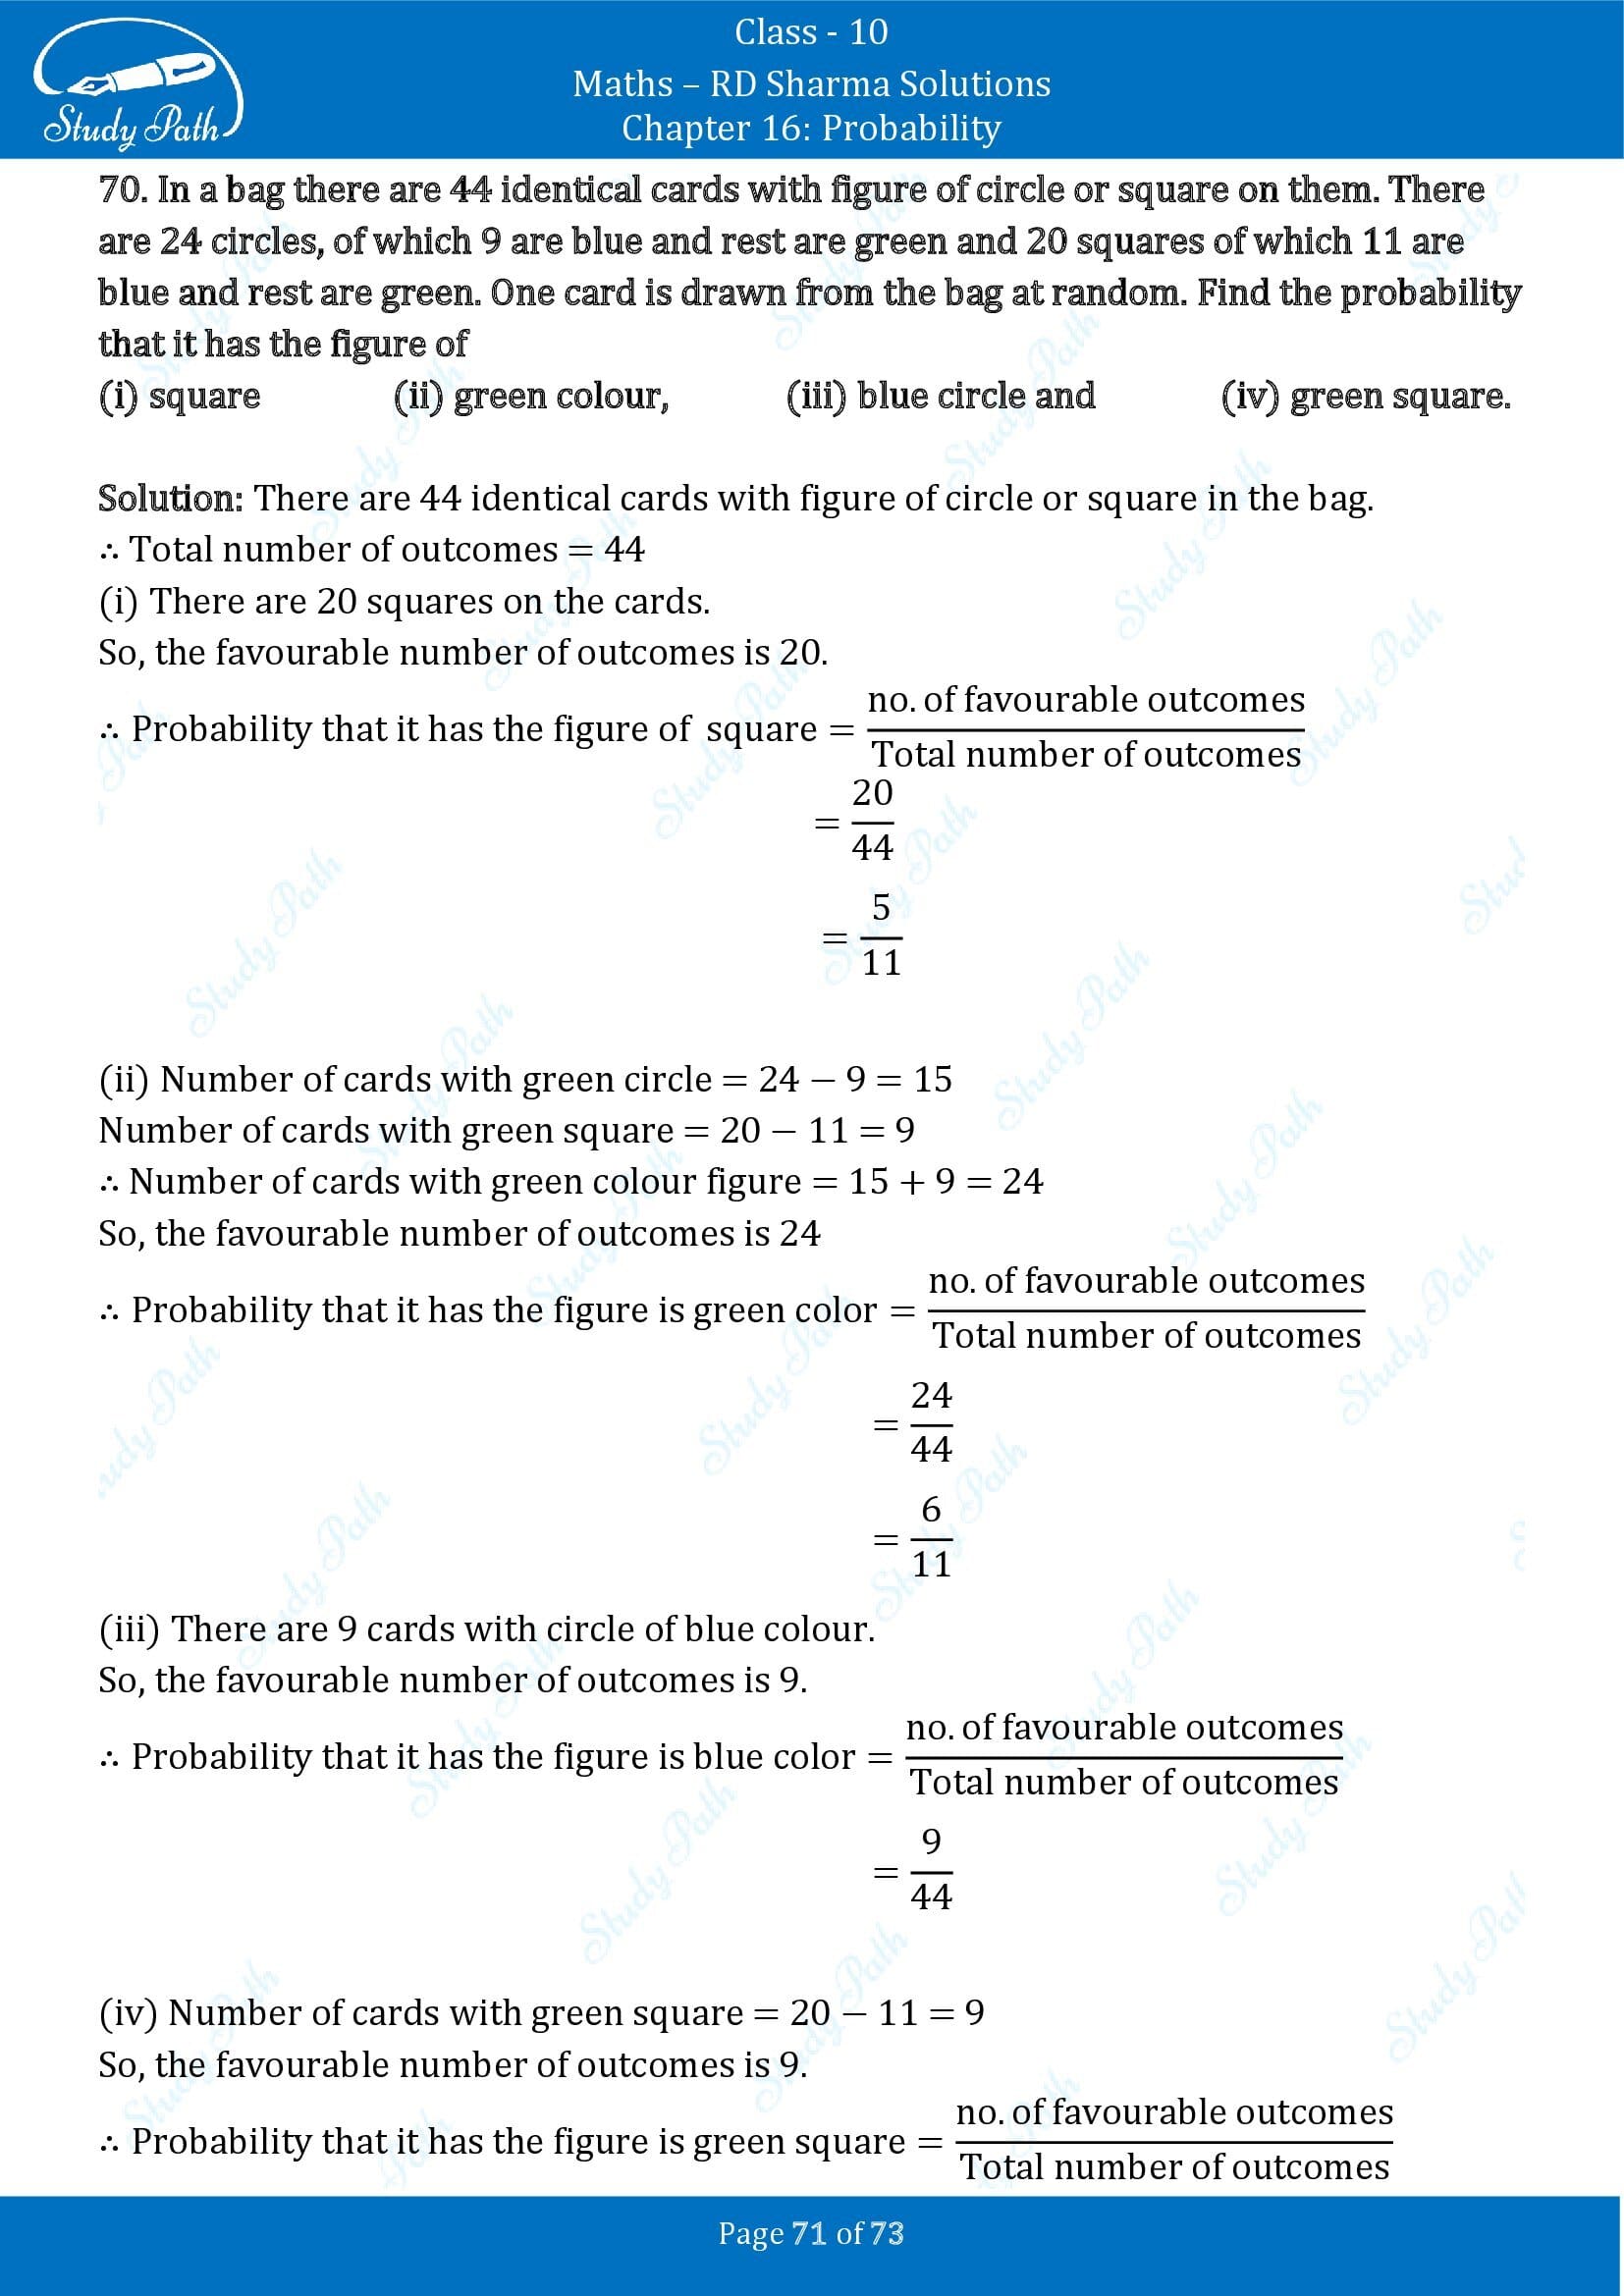 RD Sharma Solutions Class 10 Chapter 16 Probability Exercise 16.1 00071